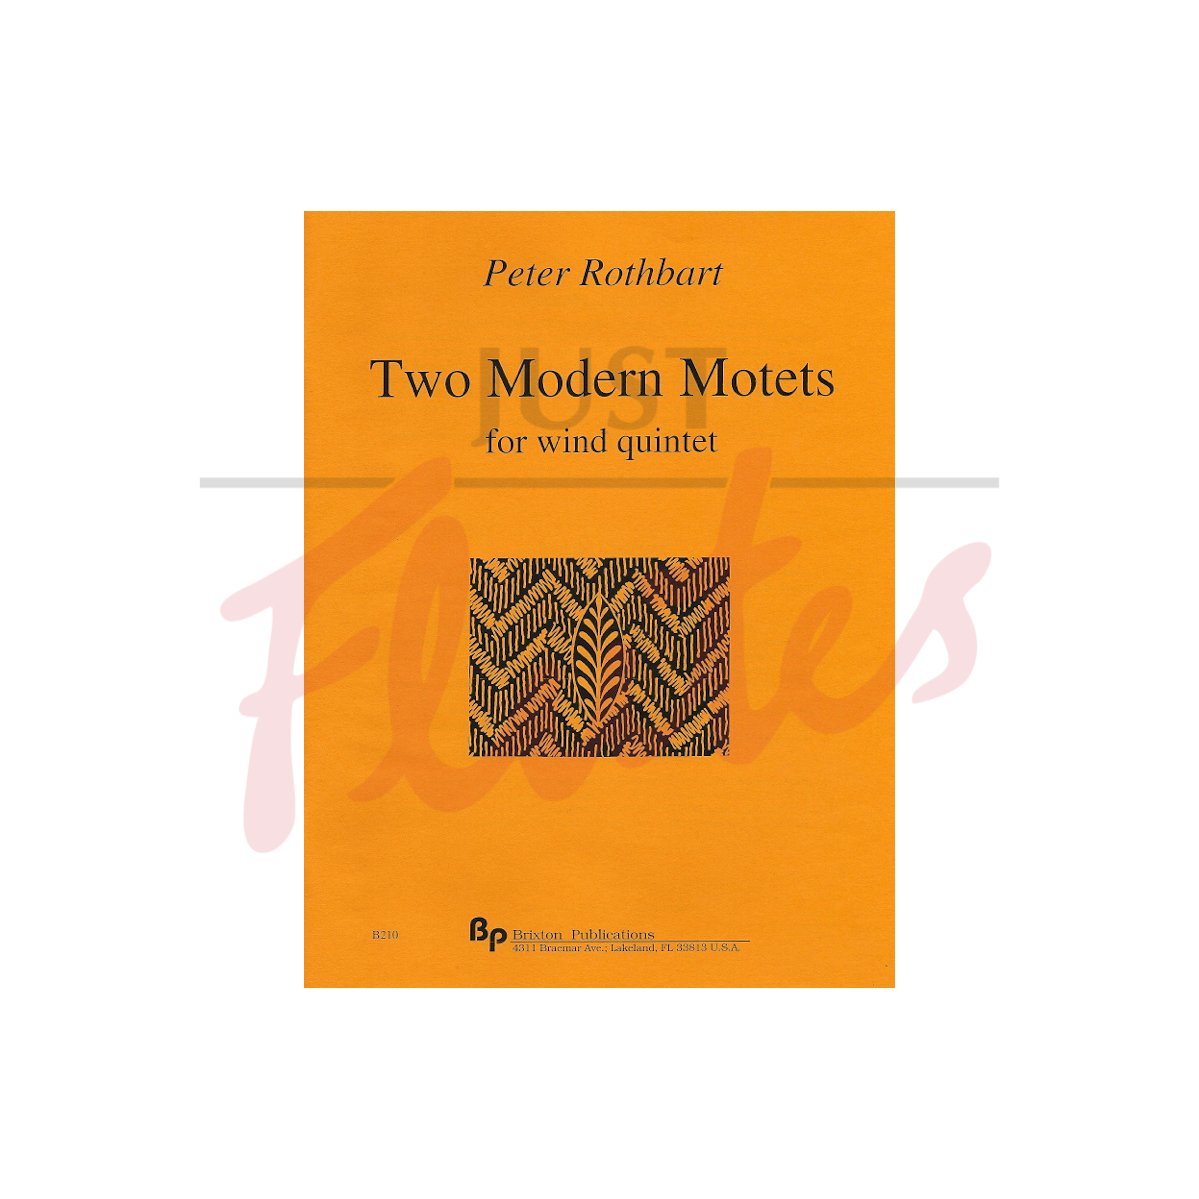 Two Modern Motets